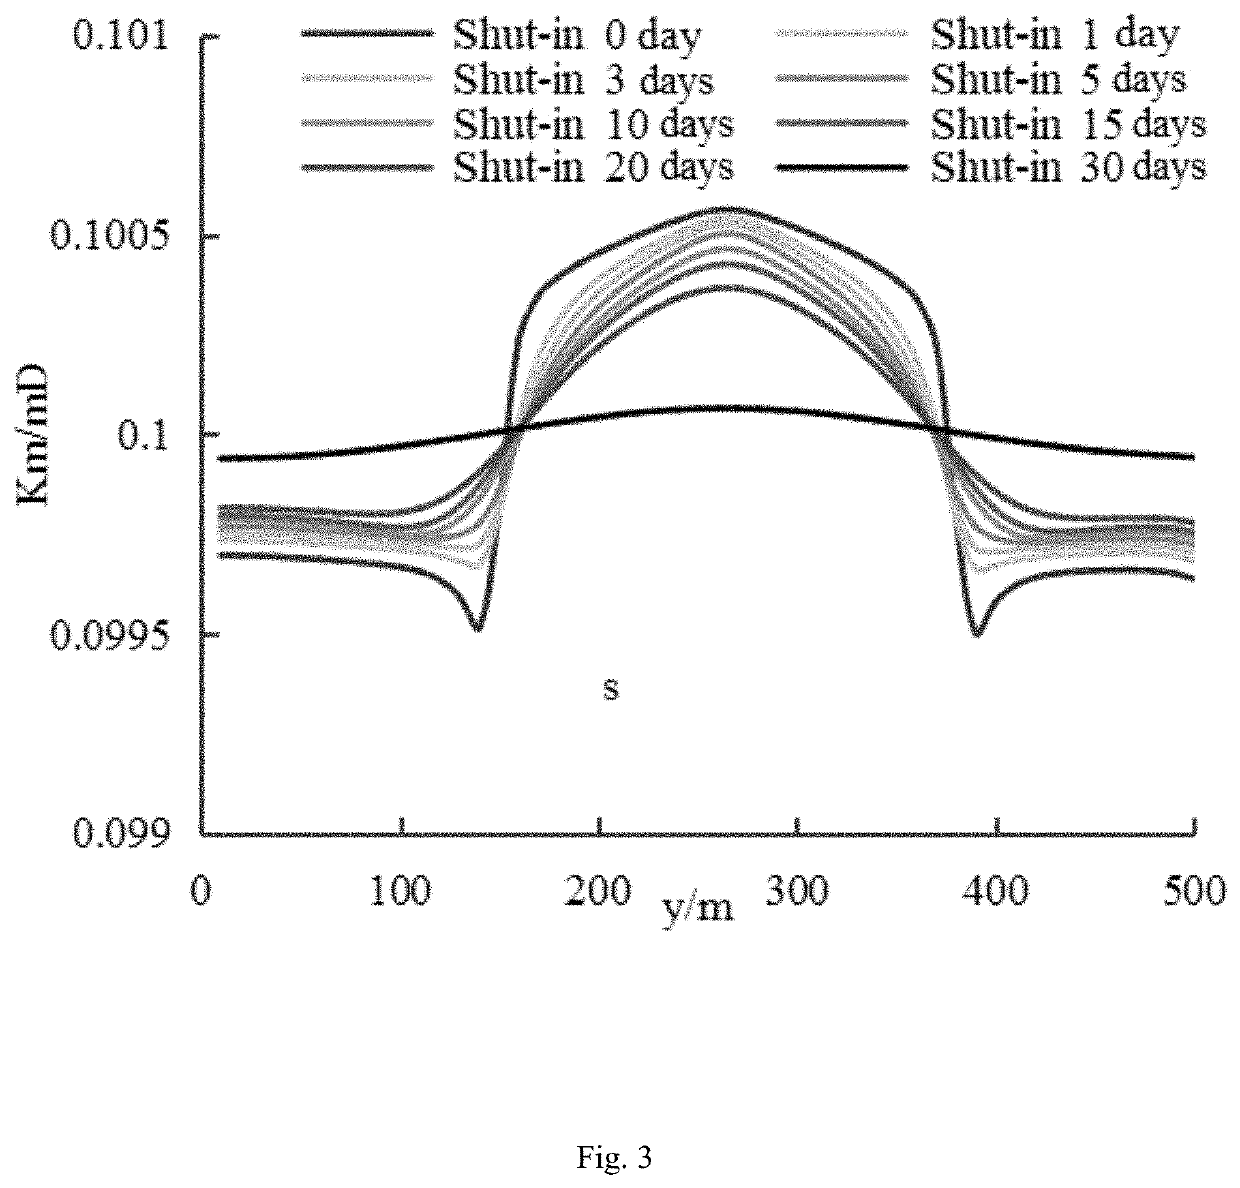 Method for predicting the optimal shut-in duration by coupling fluid flow and geological stress